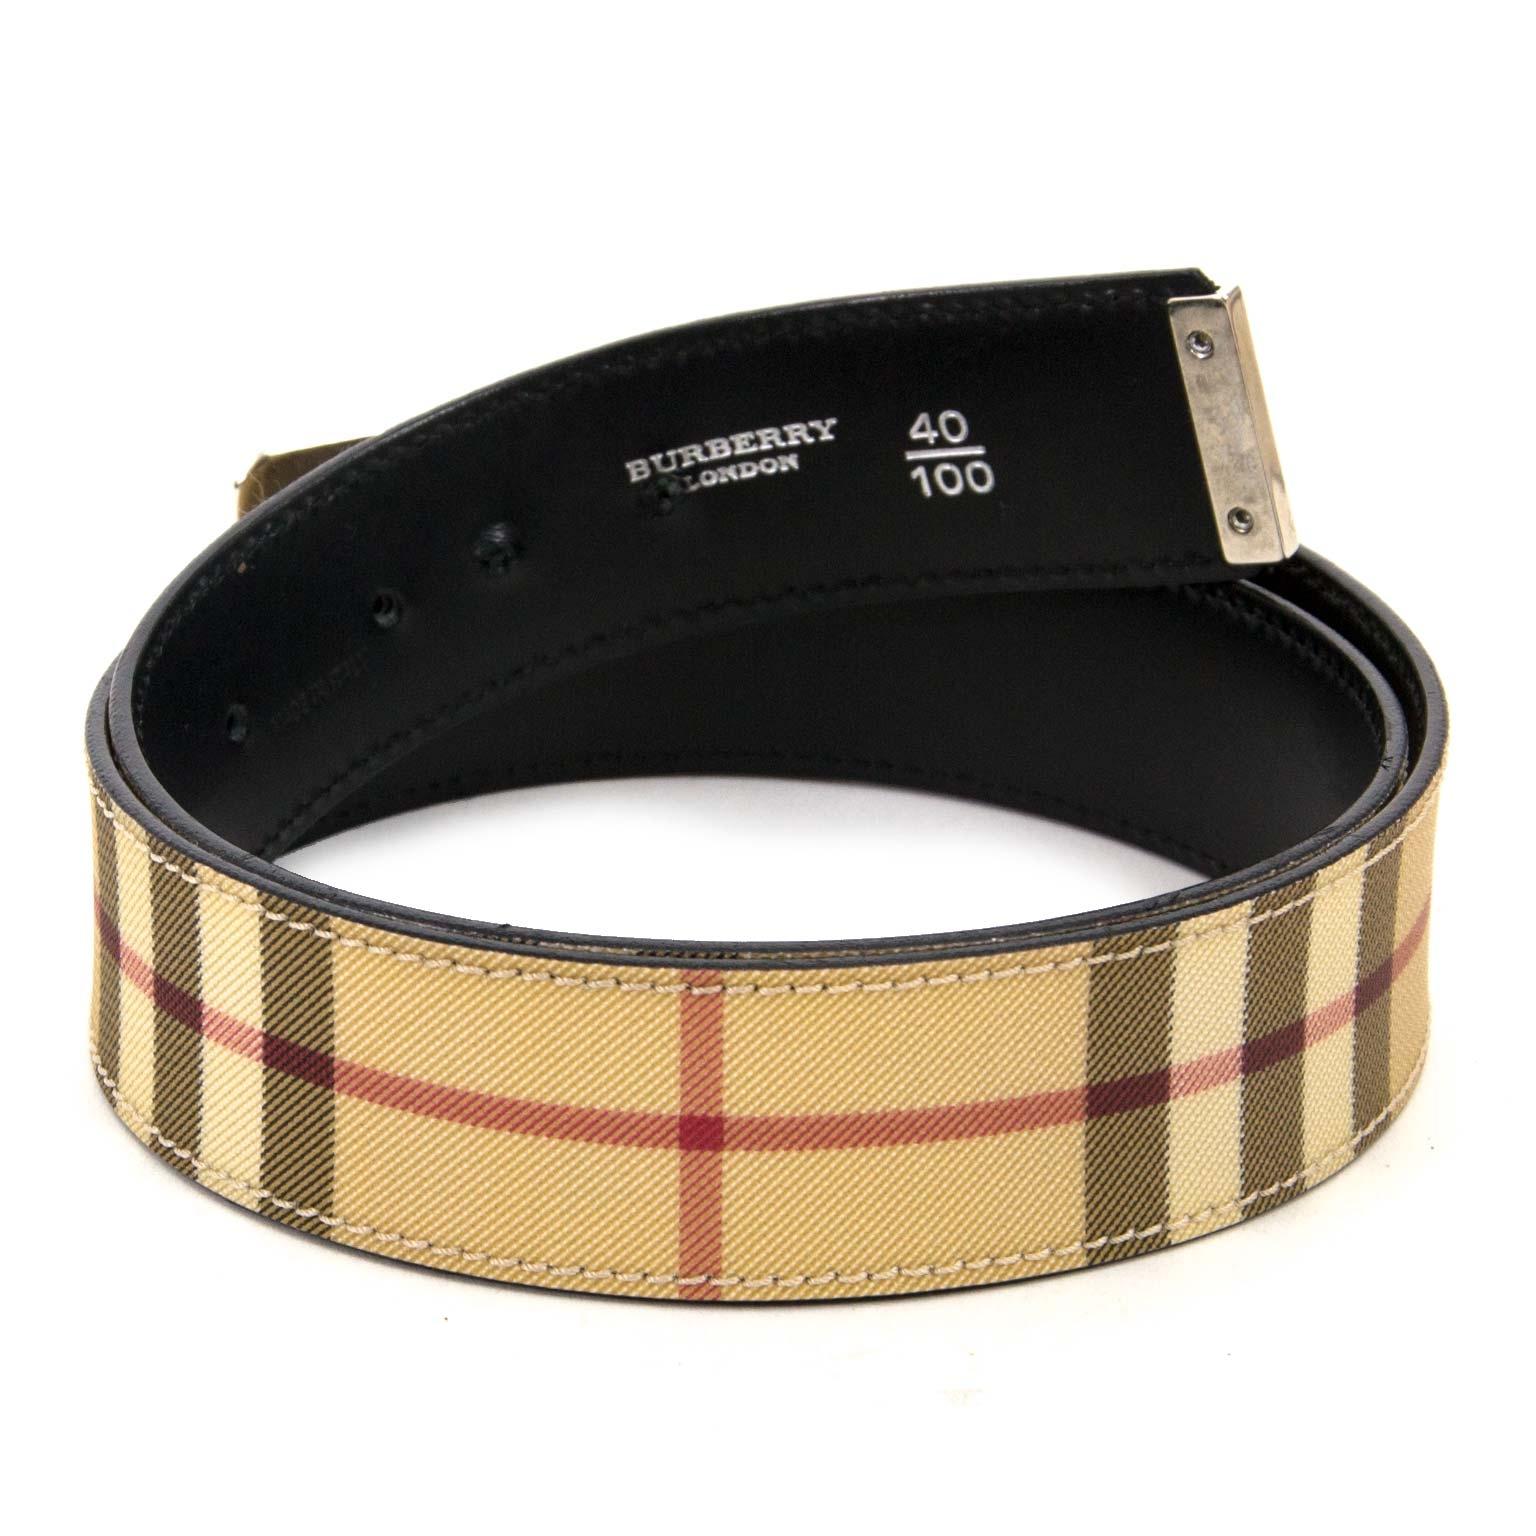 Good preloved condition

Burberry Beige Nova Check Belt - Size 100

Give your outfit a boost with this stunning Burberry belt. 
The accessory features the iconic monogram canvas. 
The silver-tone closure engraved with the Burberry logo adds a